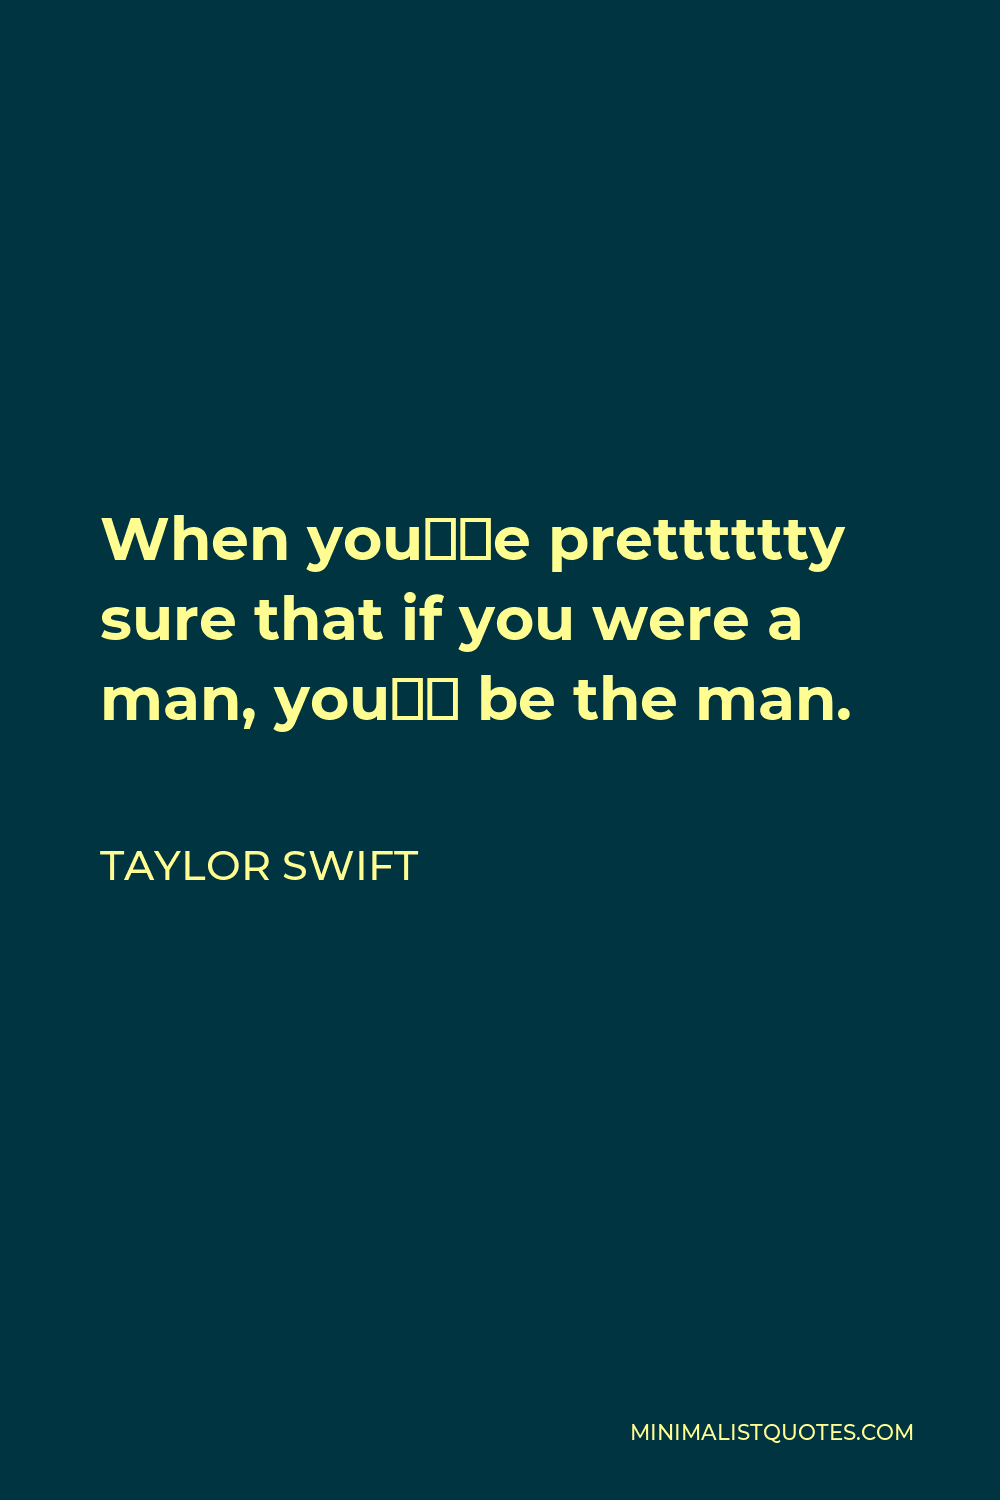 Taylor Swift Quote - When you’re pretttttty sure that if you were a man, you’d be the man.